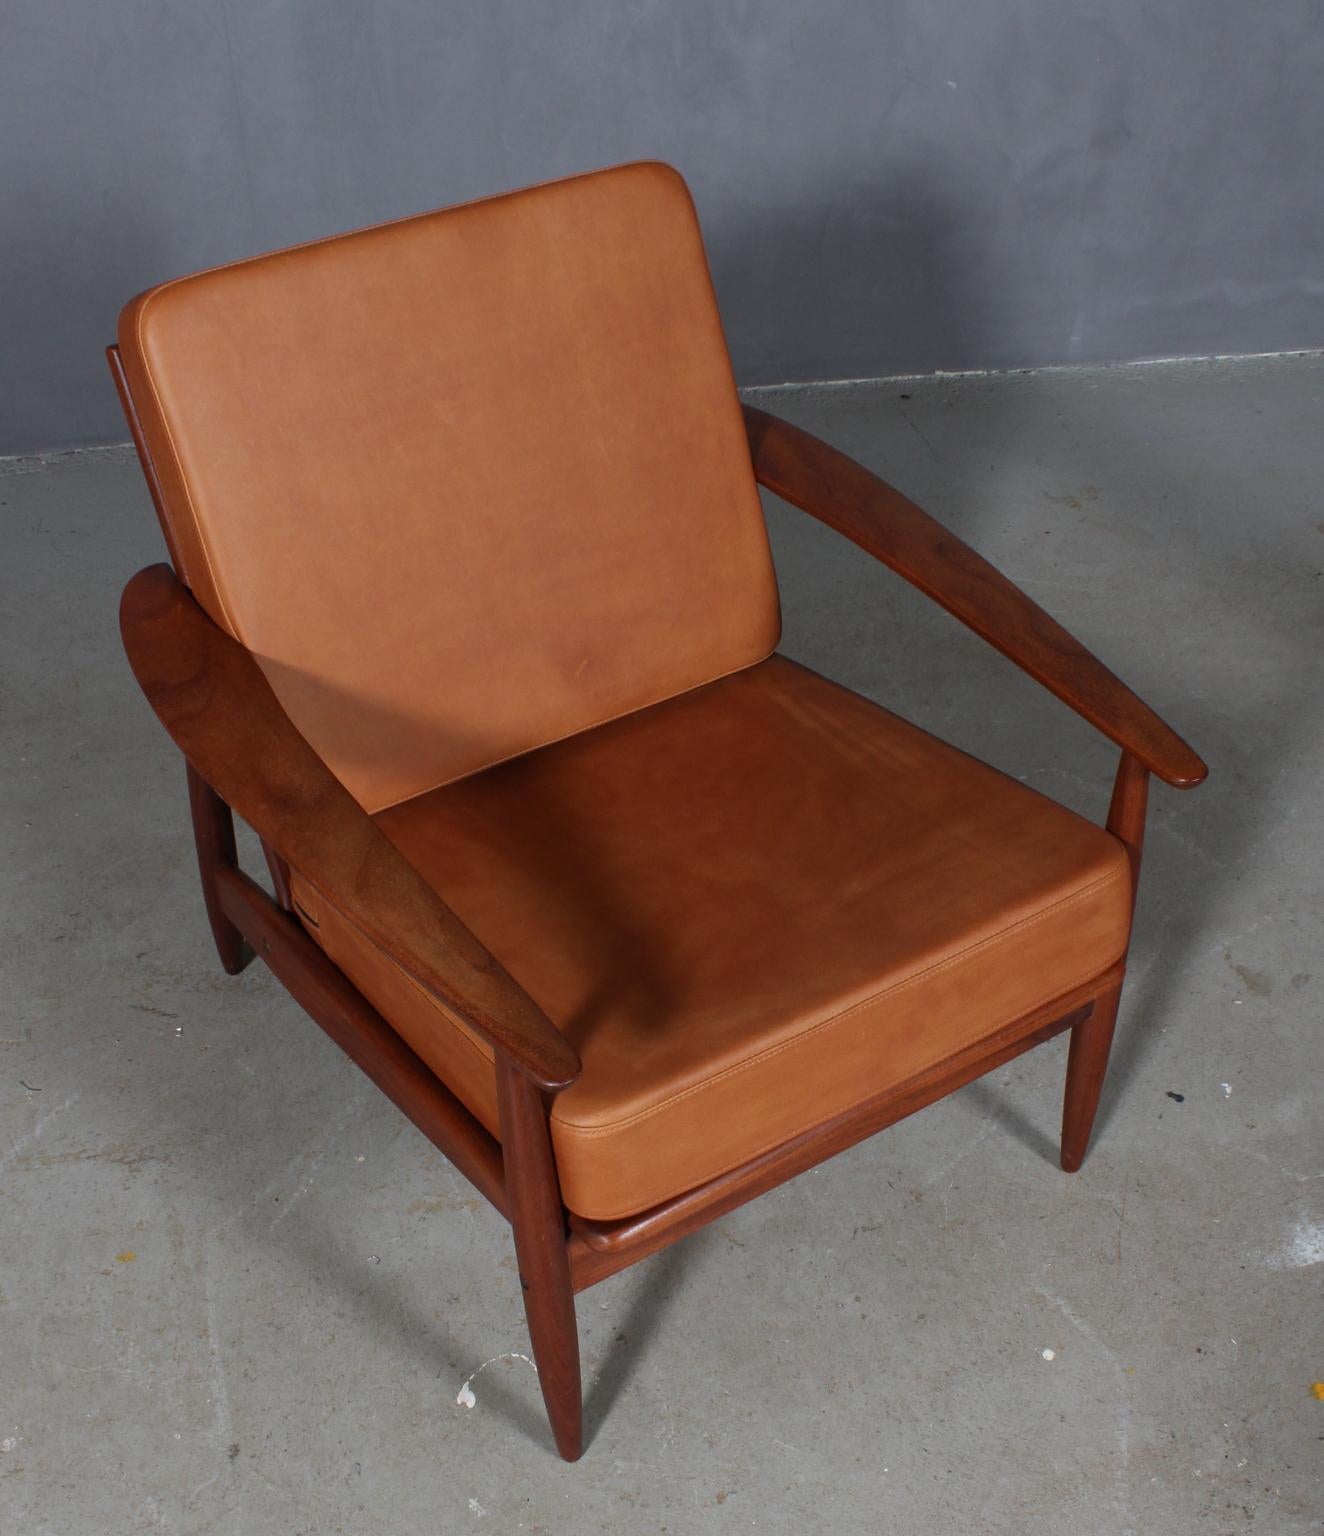 Grete Jalk lounge chair with teak frame.

New upholstered cushions with vintage tan aniline leather.